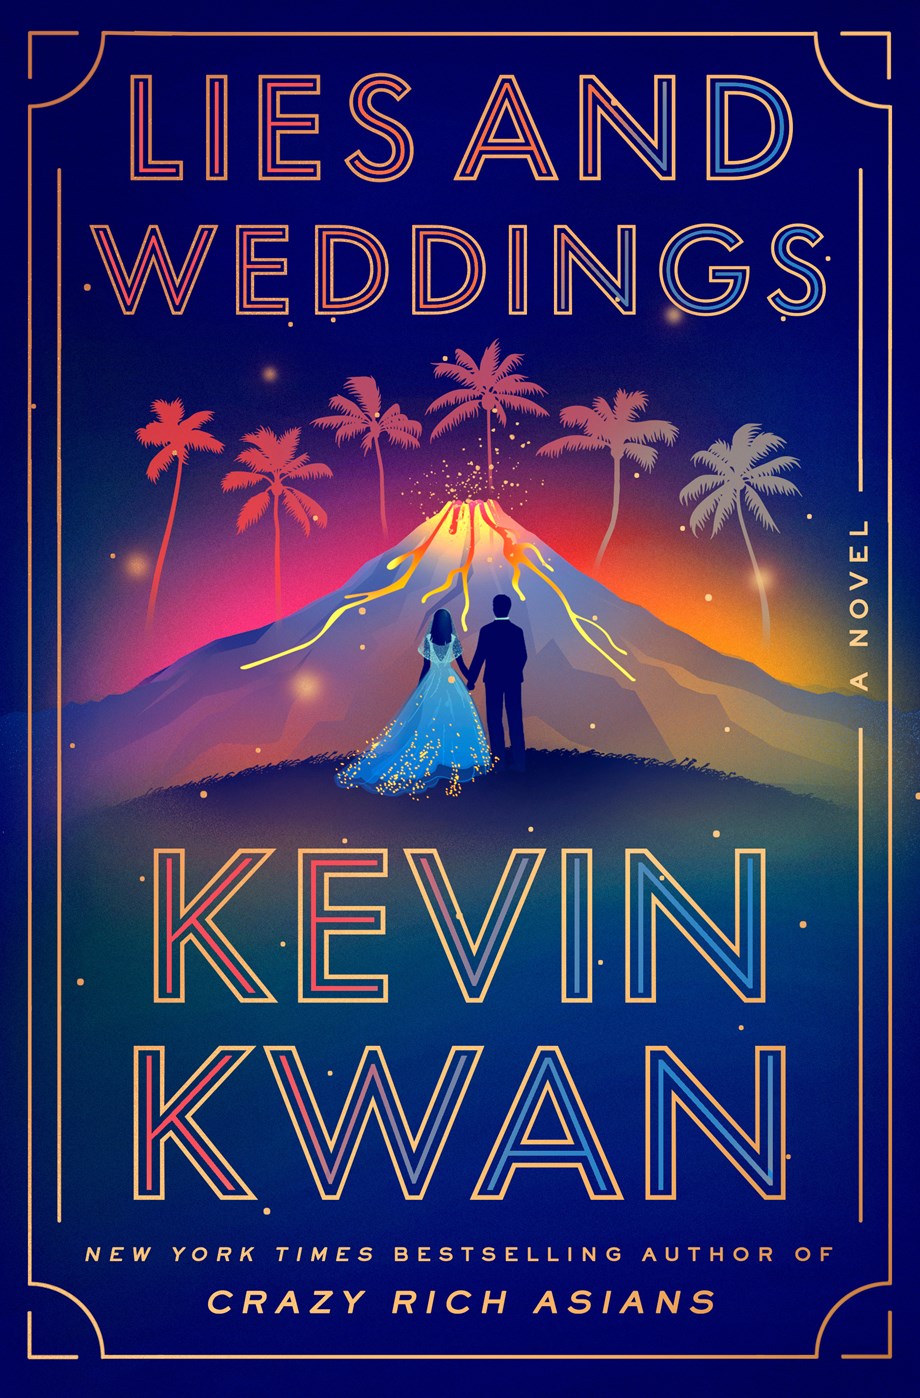 Lies and Weddings by Kevin Kwan (Hardcover) (PREORDER)